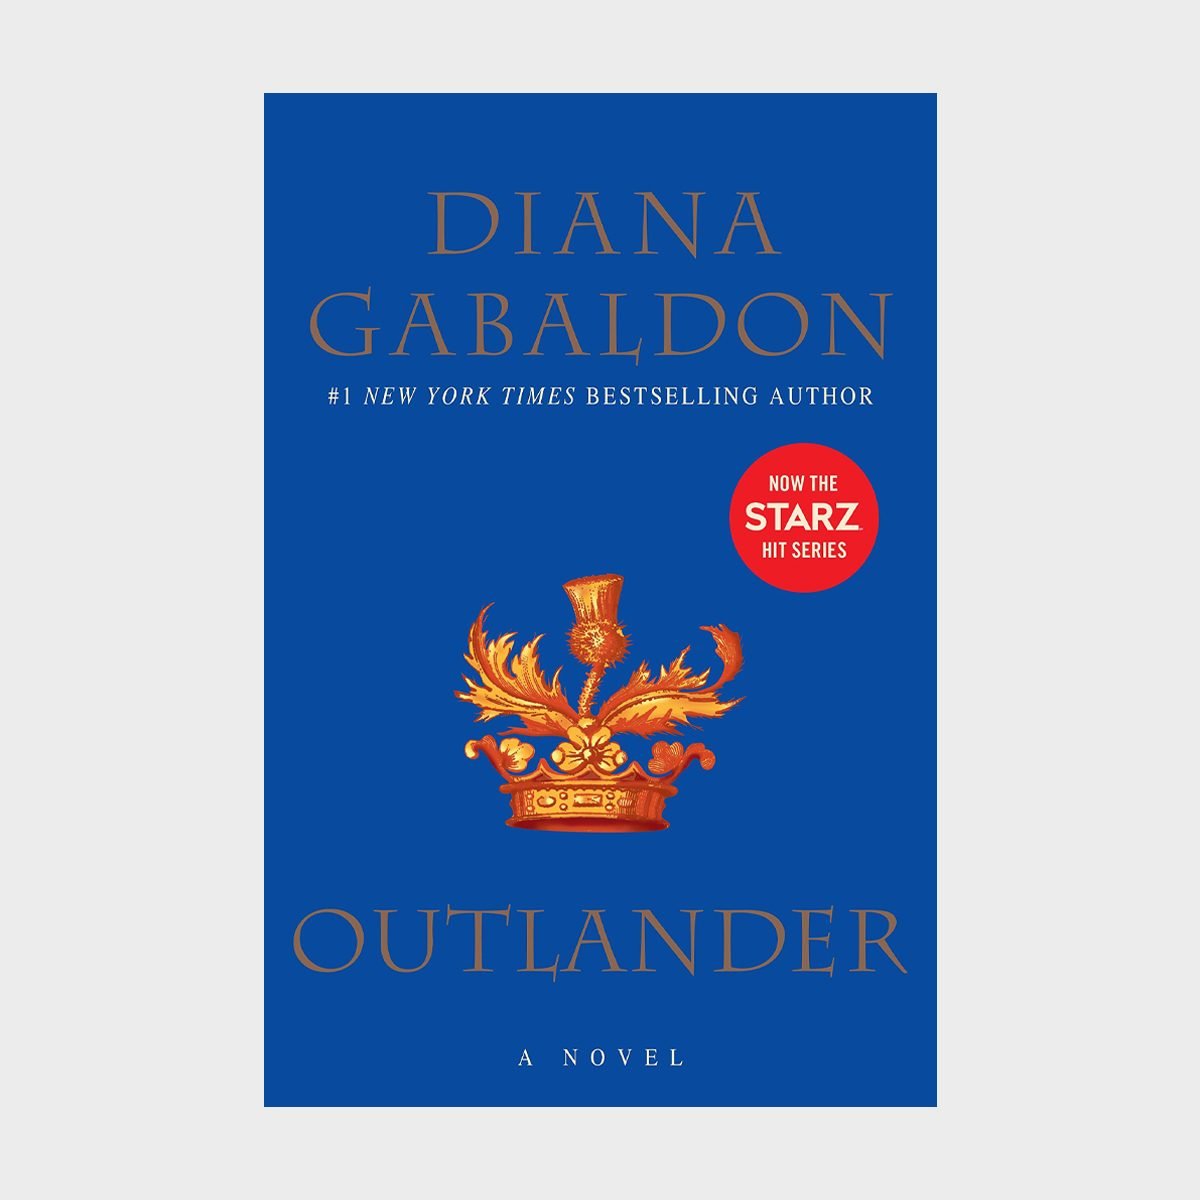 <p class=""><strong>Series starter: </strong><a href="https://www.amazon.com/Outlander-Diana-Gabaldon/dp/0385319959/" rel="noopener noreferrer"><em>Outlander</em></a></p> <p class=""><strong>What you're in for: </strong>A lusty <a href="https://www.rd.com/list/time-travel-books/" rel="noopener noreferrer">time-travel</a> romance with an unforgettable Scottish hunk</p> <p>Start with fascinating <a href="https://www.rd.com/list/historical-fiction-books/" rel="noopener noreferrer">historical fiction</a>, add some time travel and throw in a sweeping romance. What do you have? Diana Gabaldon's bestselling romance series, which begins with 1991's <em>Outlander</em>. (And yes, there's a TV adaptation. It first premiered on Starz in 2014.) There are nine books in the <em>Outlander</em> book series, which follows Claire Randall, a former British combat nurse taking a second honeymoon in Scotland in 1945. During her trip, she's accidentally transported to 1743, where she meets the charming and handsome Jamie Fraser. In the war-torn Scotland of the past, Claire becomes divided between two men—her husband and Jamie—and two vastly different periods of time.</p> <p class="listicle-page__cta-button-shop"><a class="shop-btn" href="https://www.amazon.com/Outlander-Diana-Gabaldon/dp/0385319959/">Shop Now</a></p> <p><strong>Get <em>Reader’s <b><i>Digest</i></b></em><b>’s</b> </strong><a href="https://www.rd.com/newsletter/?int_source=direct&int_medium=rd.com&int_campaign=nlrda_20221001_topperformingcontentnlsignup&int_placement=incontent"><strong>Read Up newsletter</strong></a><strong> for humor, cleaning, travel, tech and fun facts all week long.</strong></p>